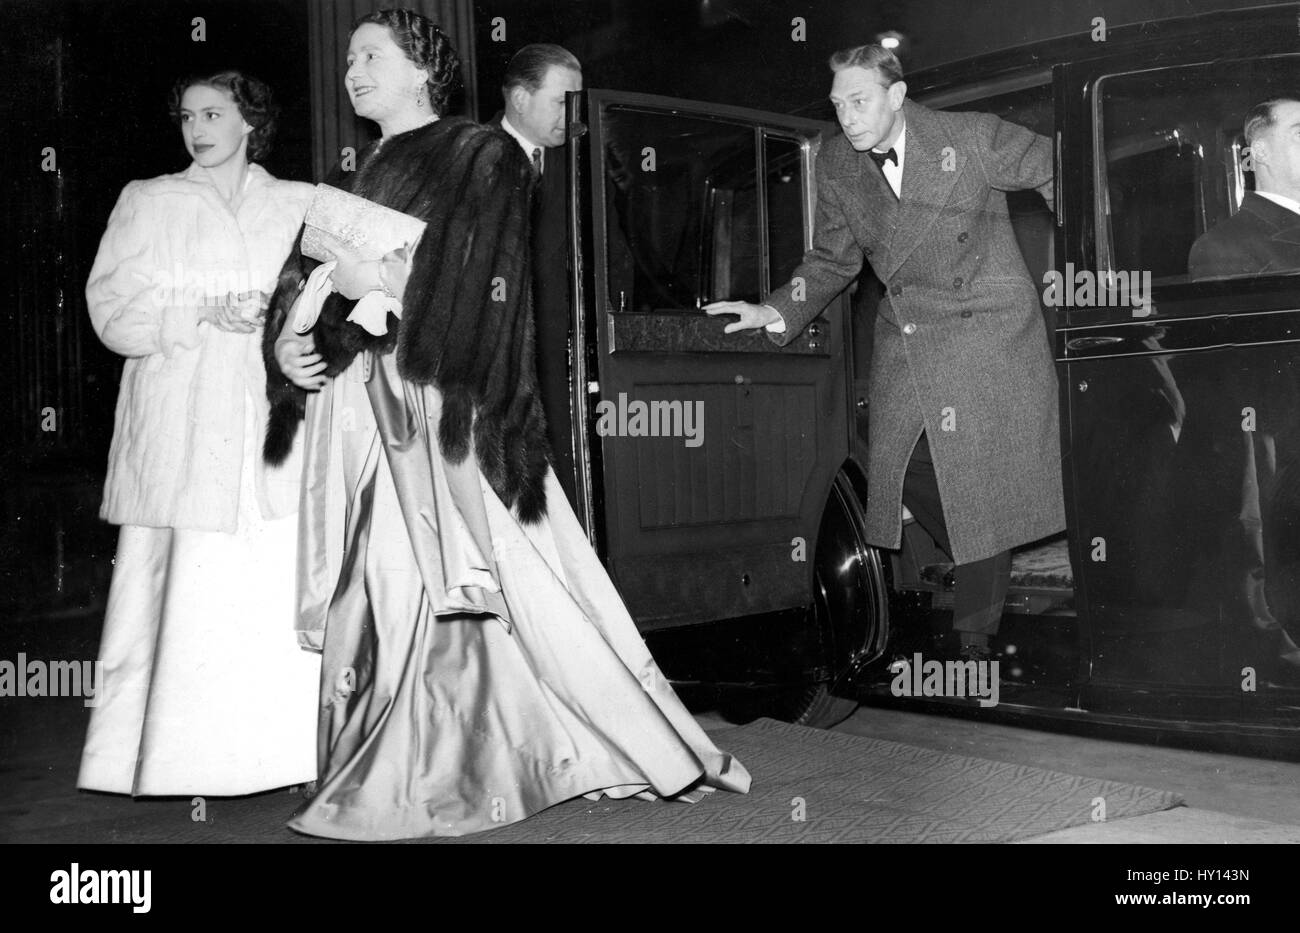 The Queen and Princess Margaret pause for a moment to wait for King Goerge VI to alight from a car as they arrive at the Theatre Royal, Drury Lane, London, to see a performance of the American musical 'South Pacific'. The occasion was a Royal Family party on the eve of the departure of Princess Elizabeth and the Duke of Edinburgh (who also attended the theatre) on their Commonwealth tour. It was the King's first visit to a theatre since his illness. Stock Photo